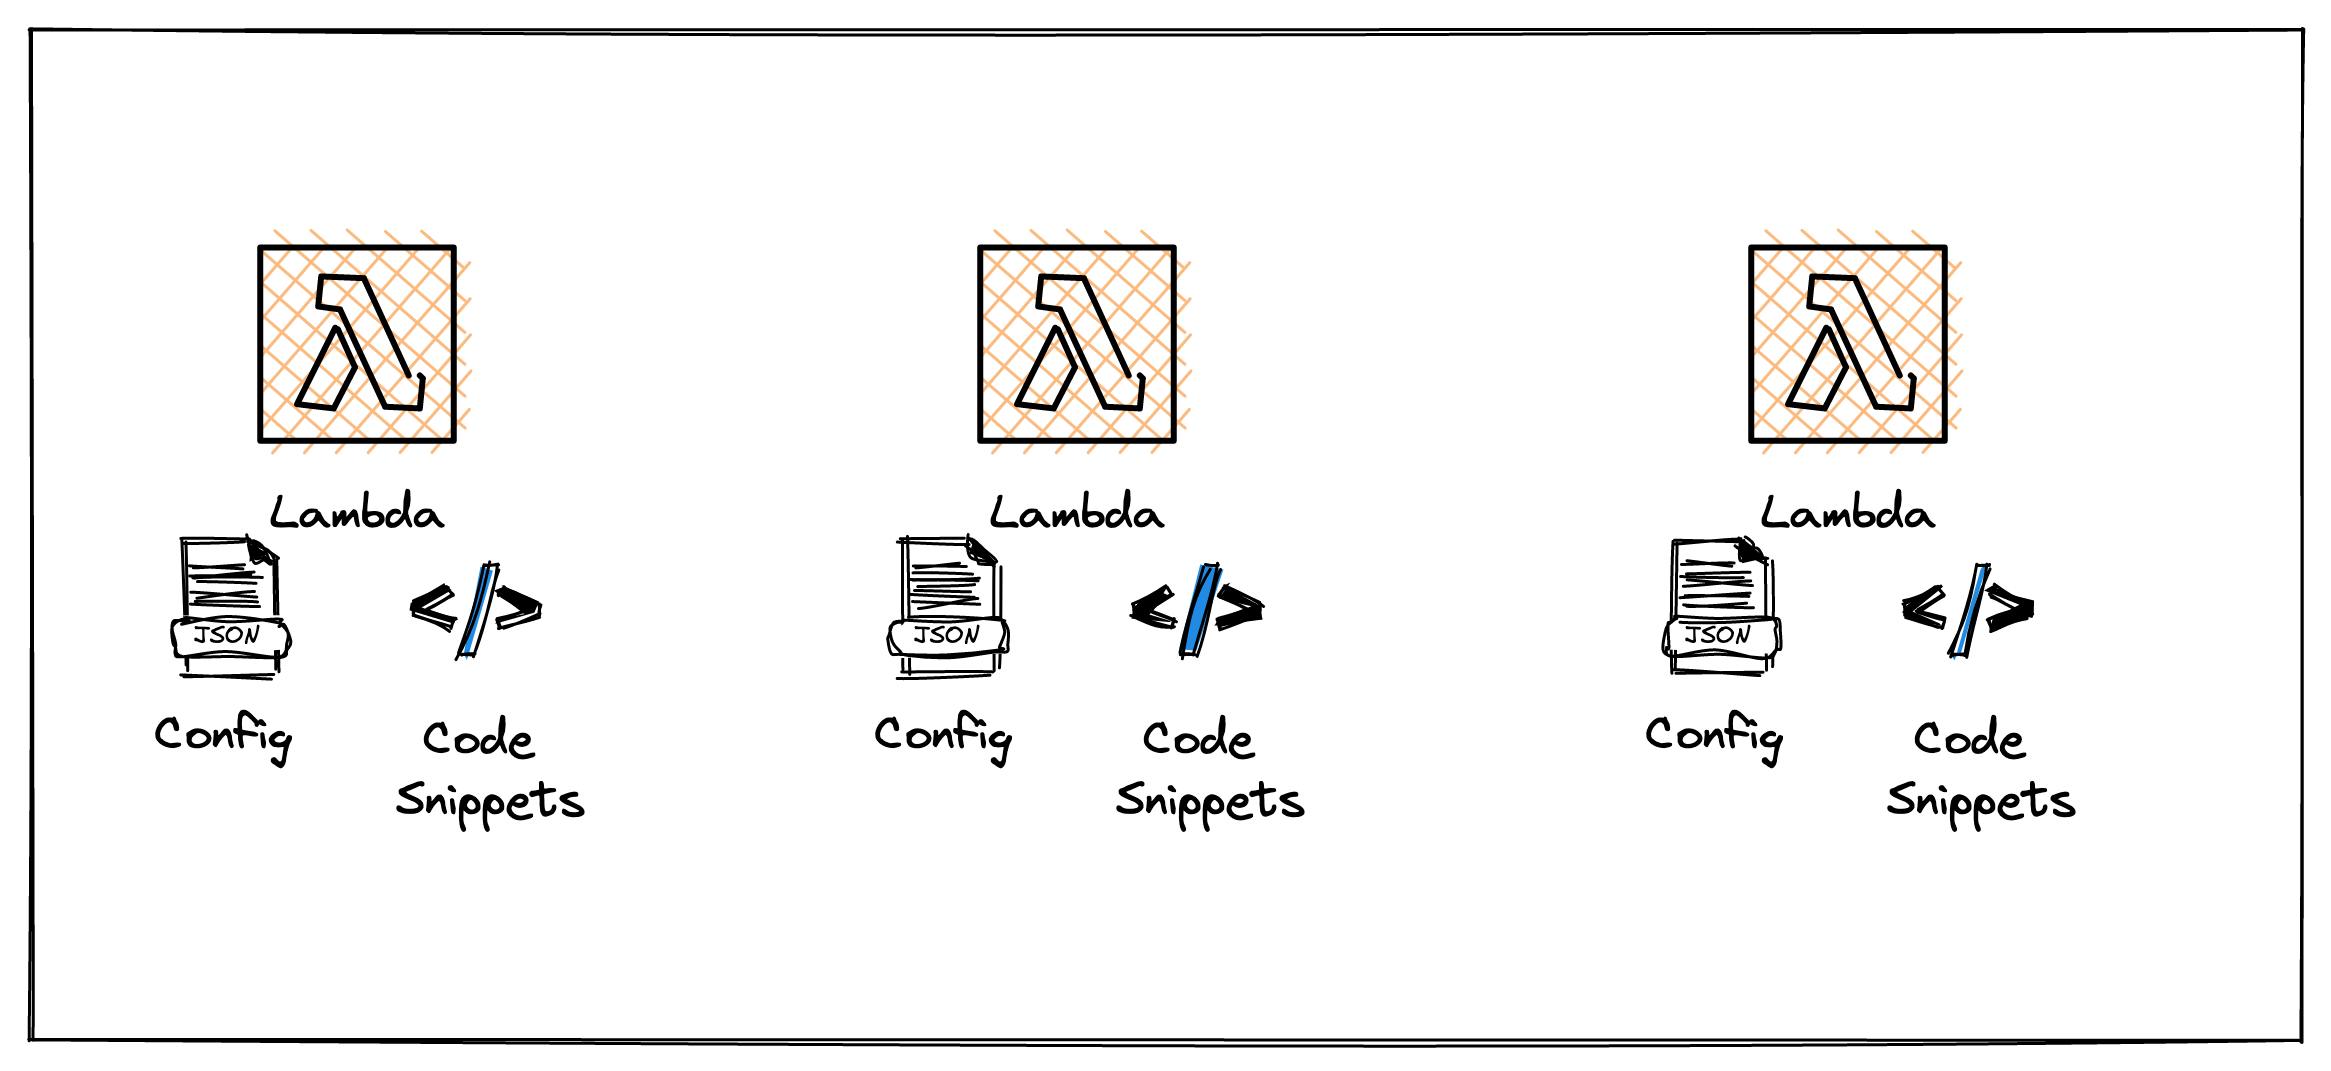 lambda configs and code snippets image